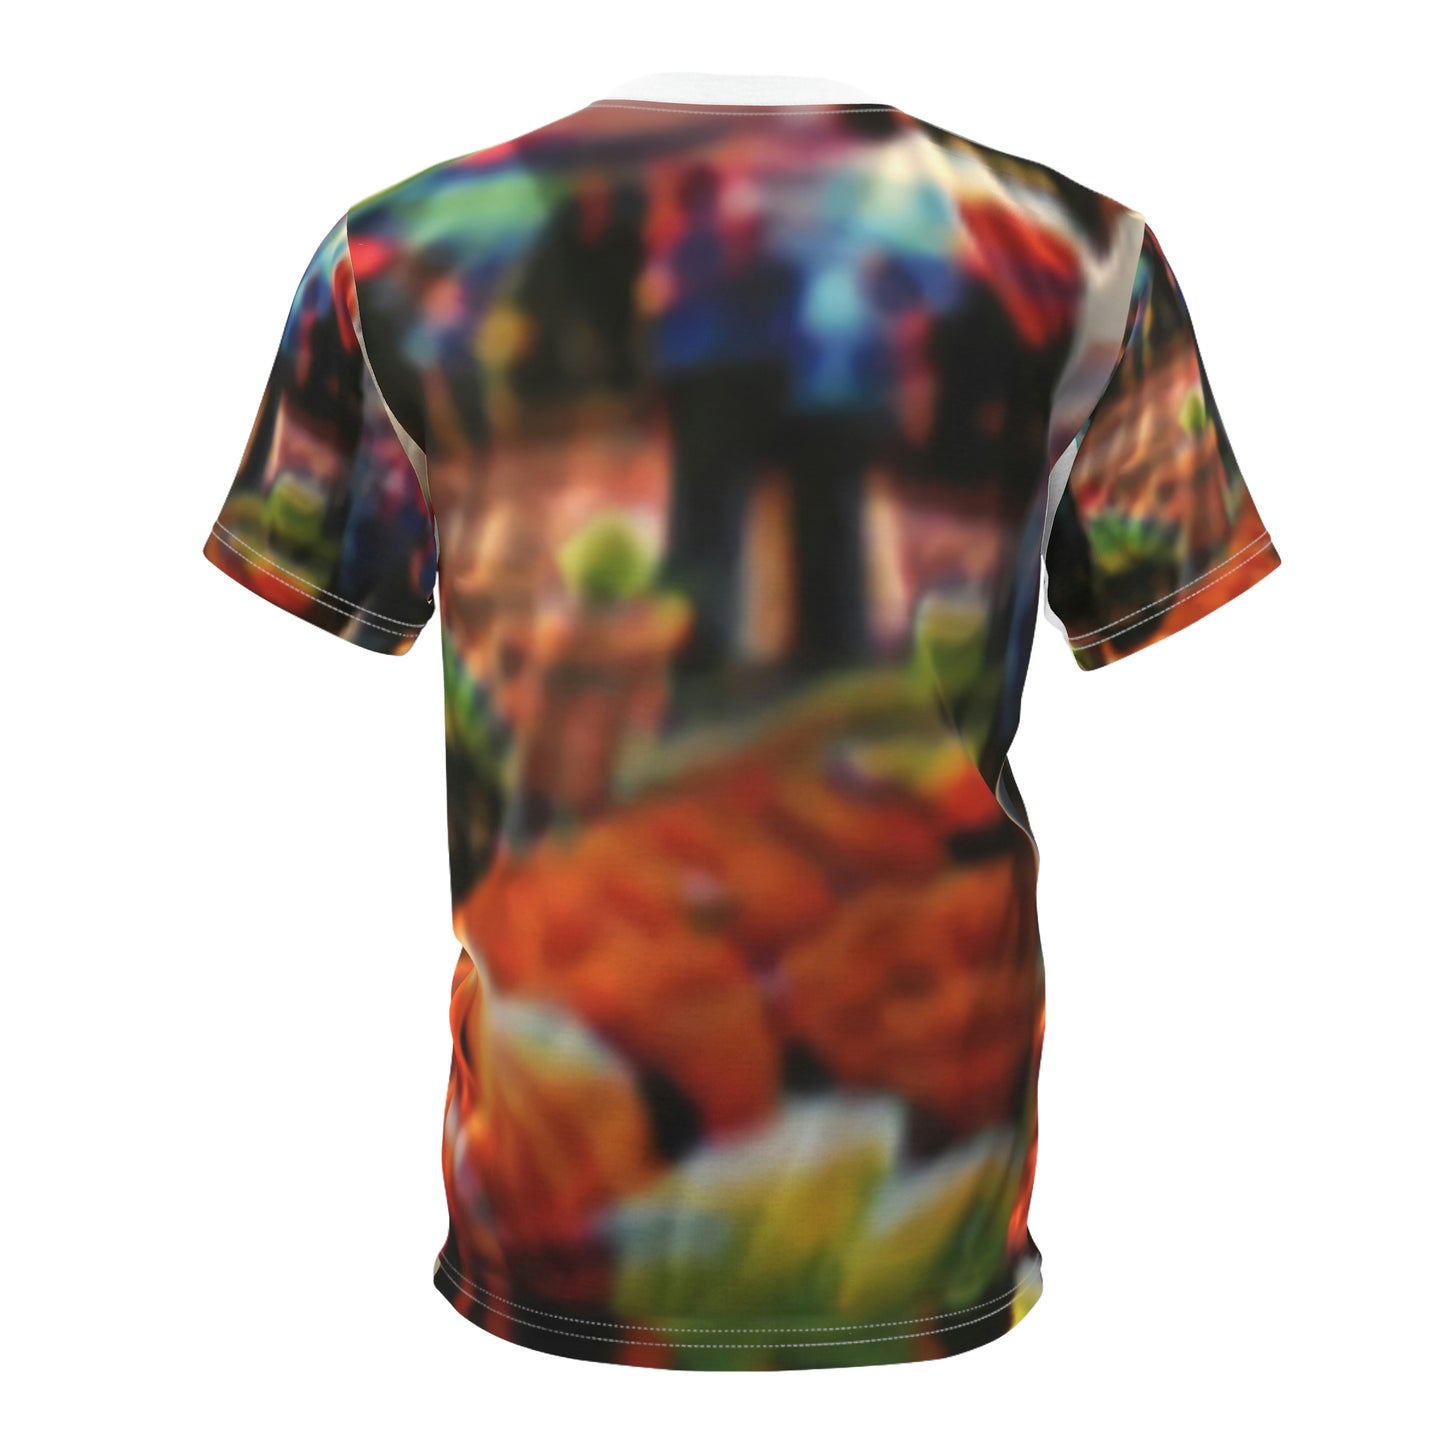 Anti Facial Recognition AI Invisibility Adversarial Pattern Unisex Cut & Sew Tee